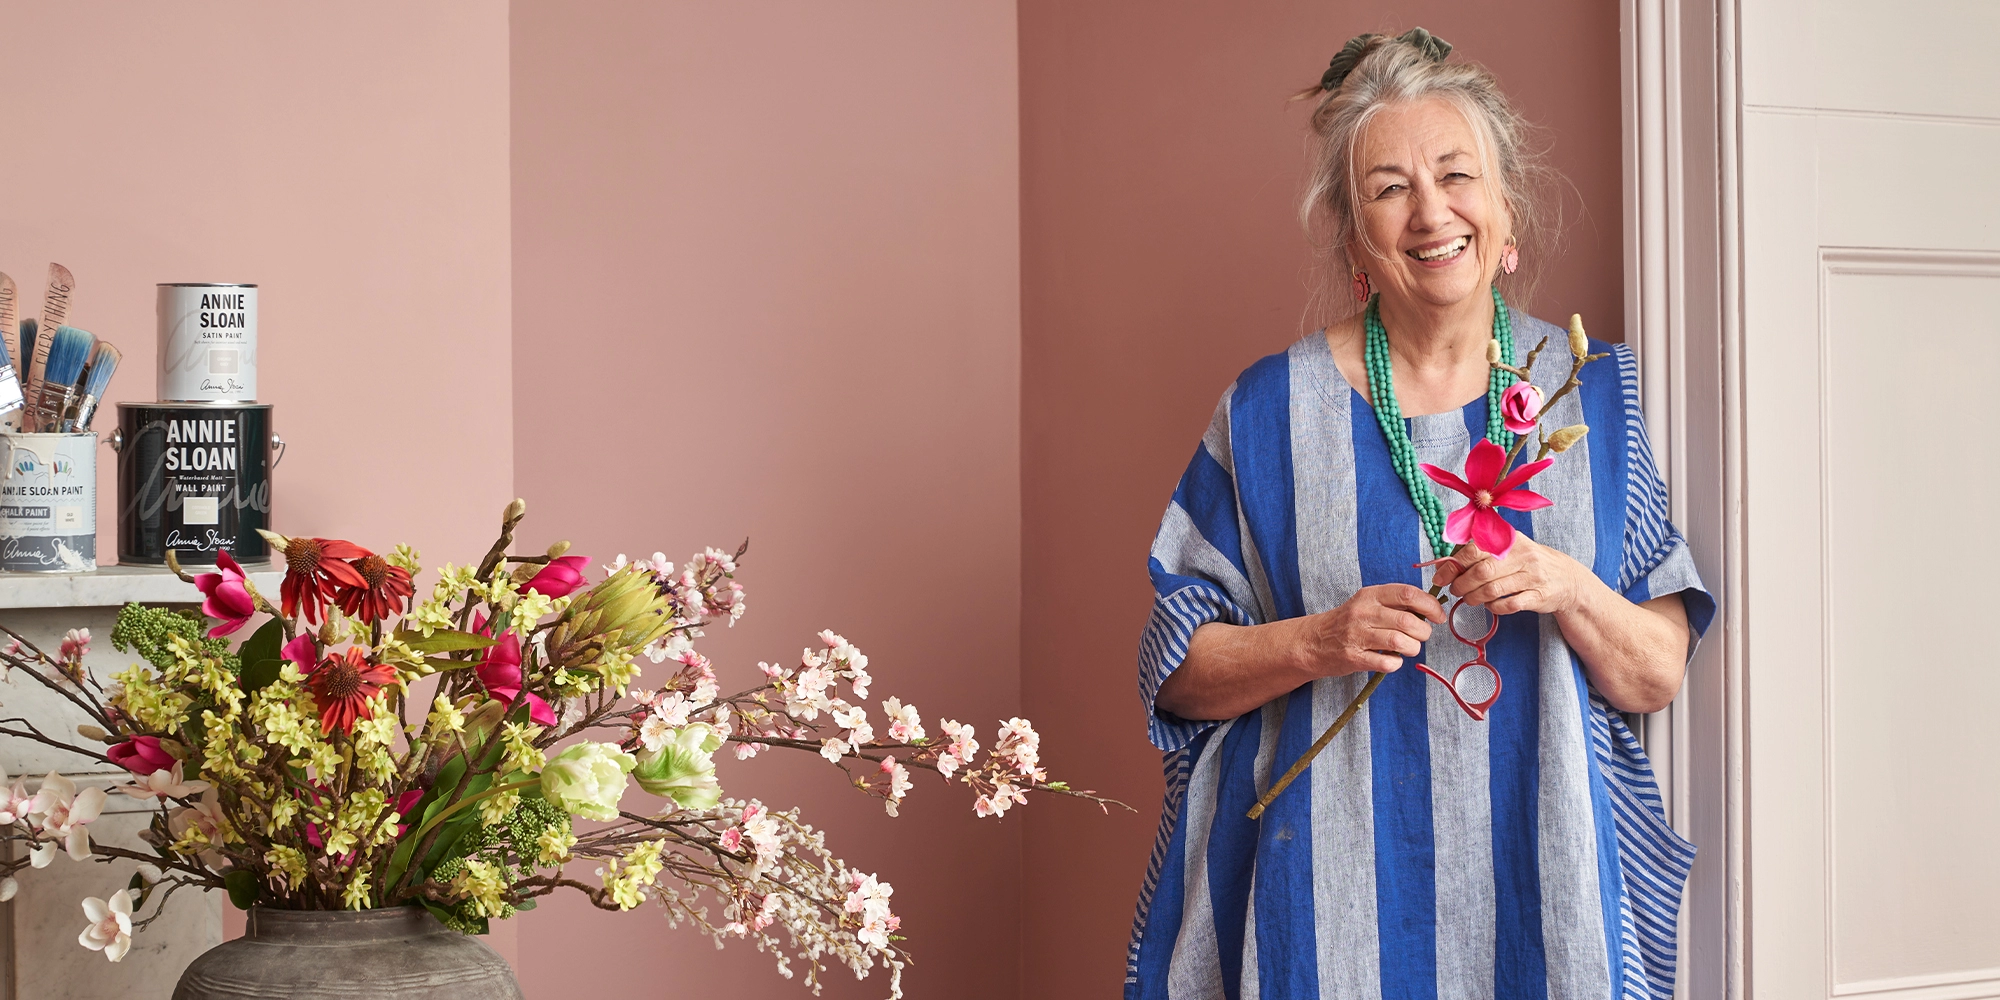 Annie Sloan CBE, founder of Annie Sloan, smiling at the camera wearing a blue striped dress, stood in front of a pink wall.